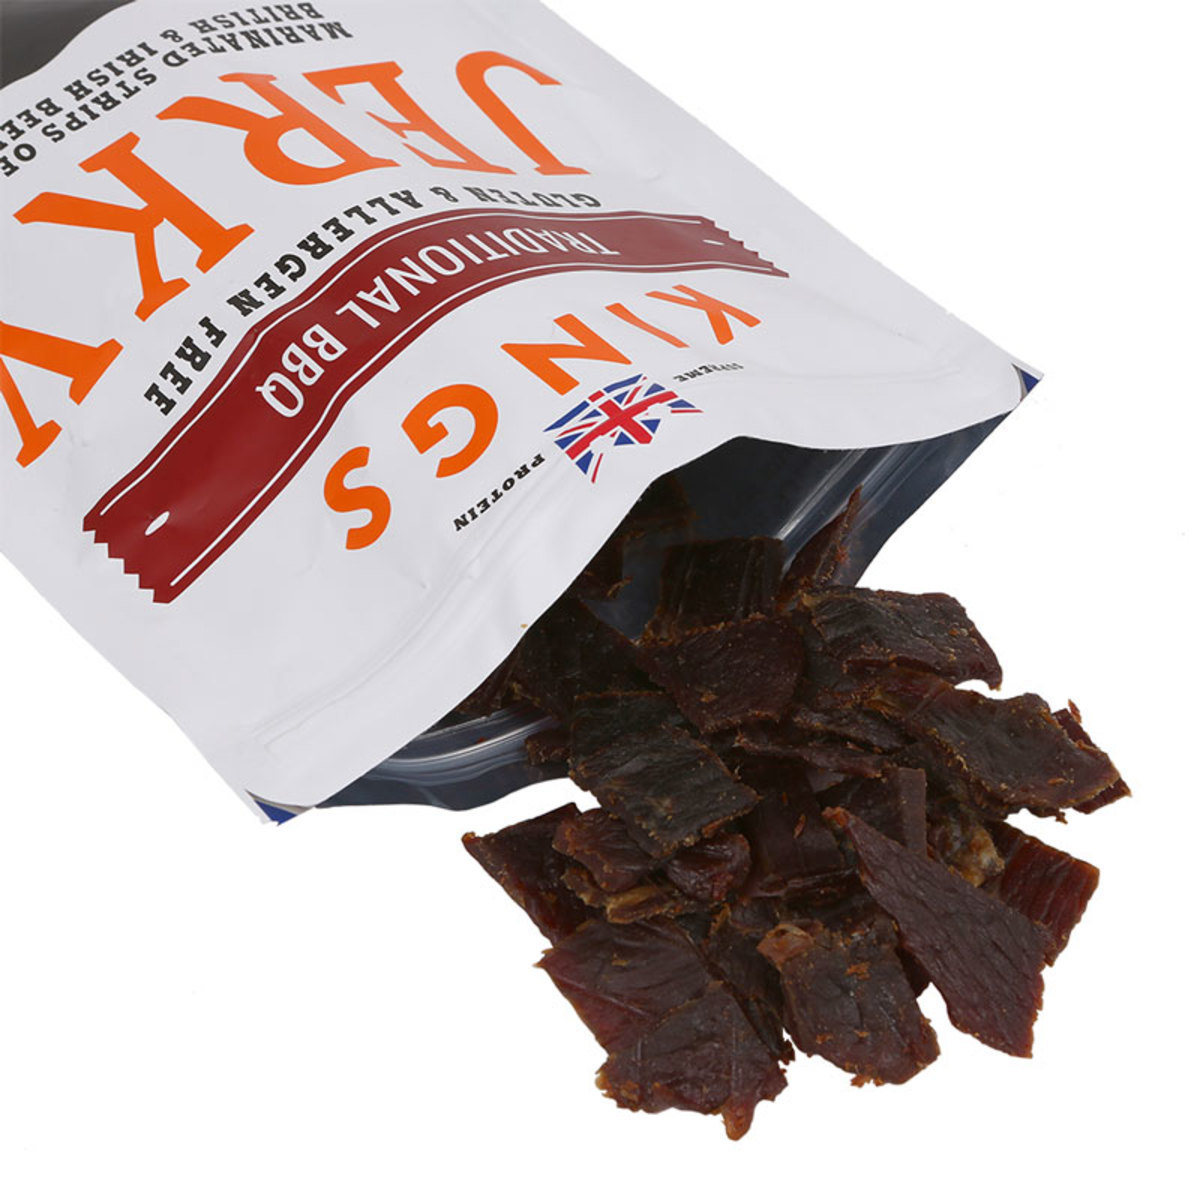 Kings Beef Jerky - Traditional BBQ Flavour, 2 x 350g Titan Packs